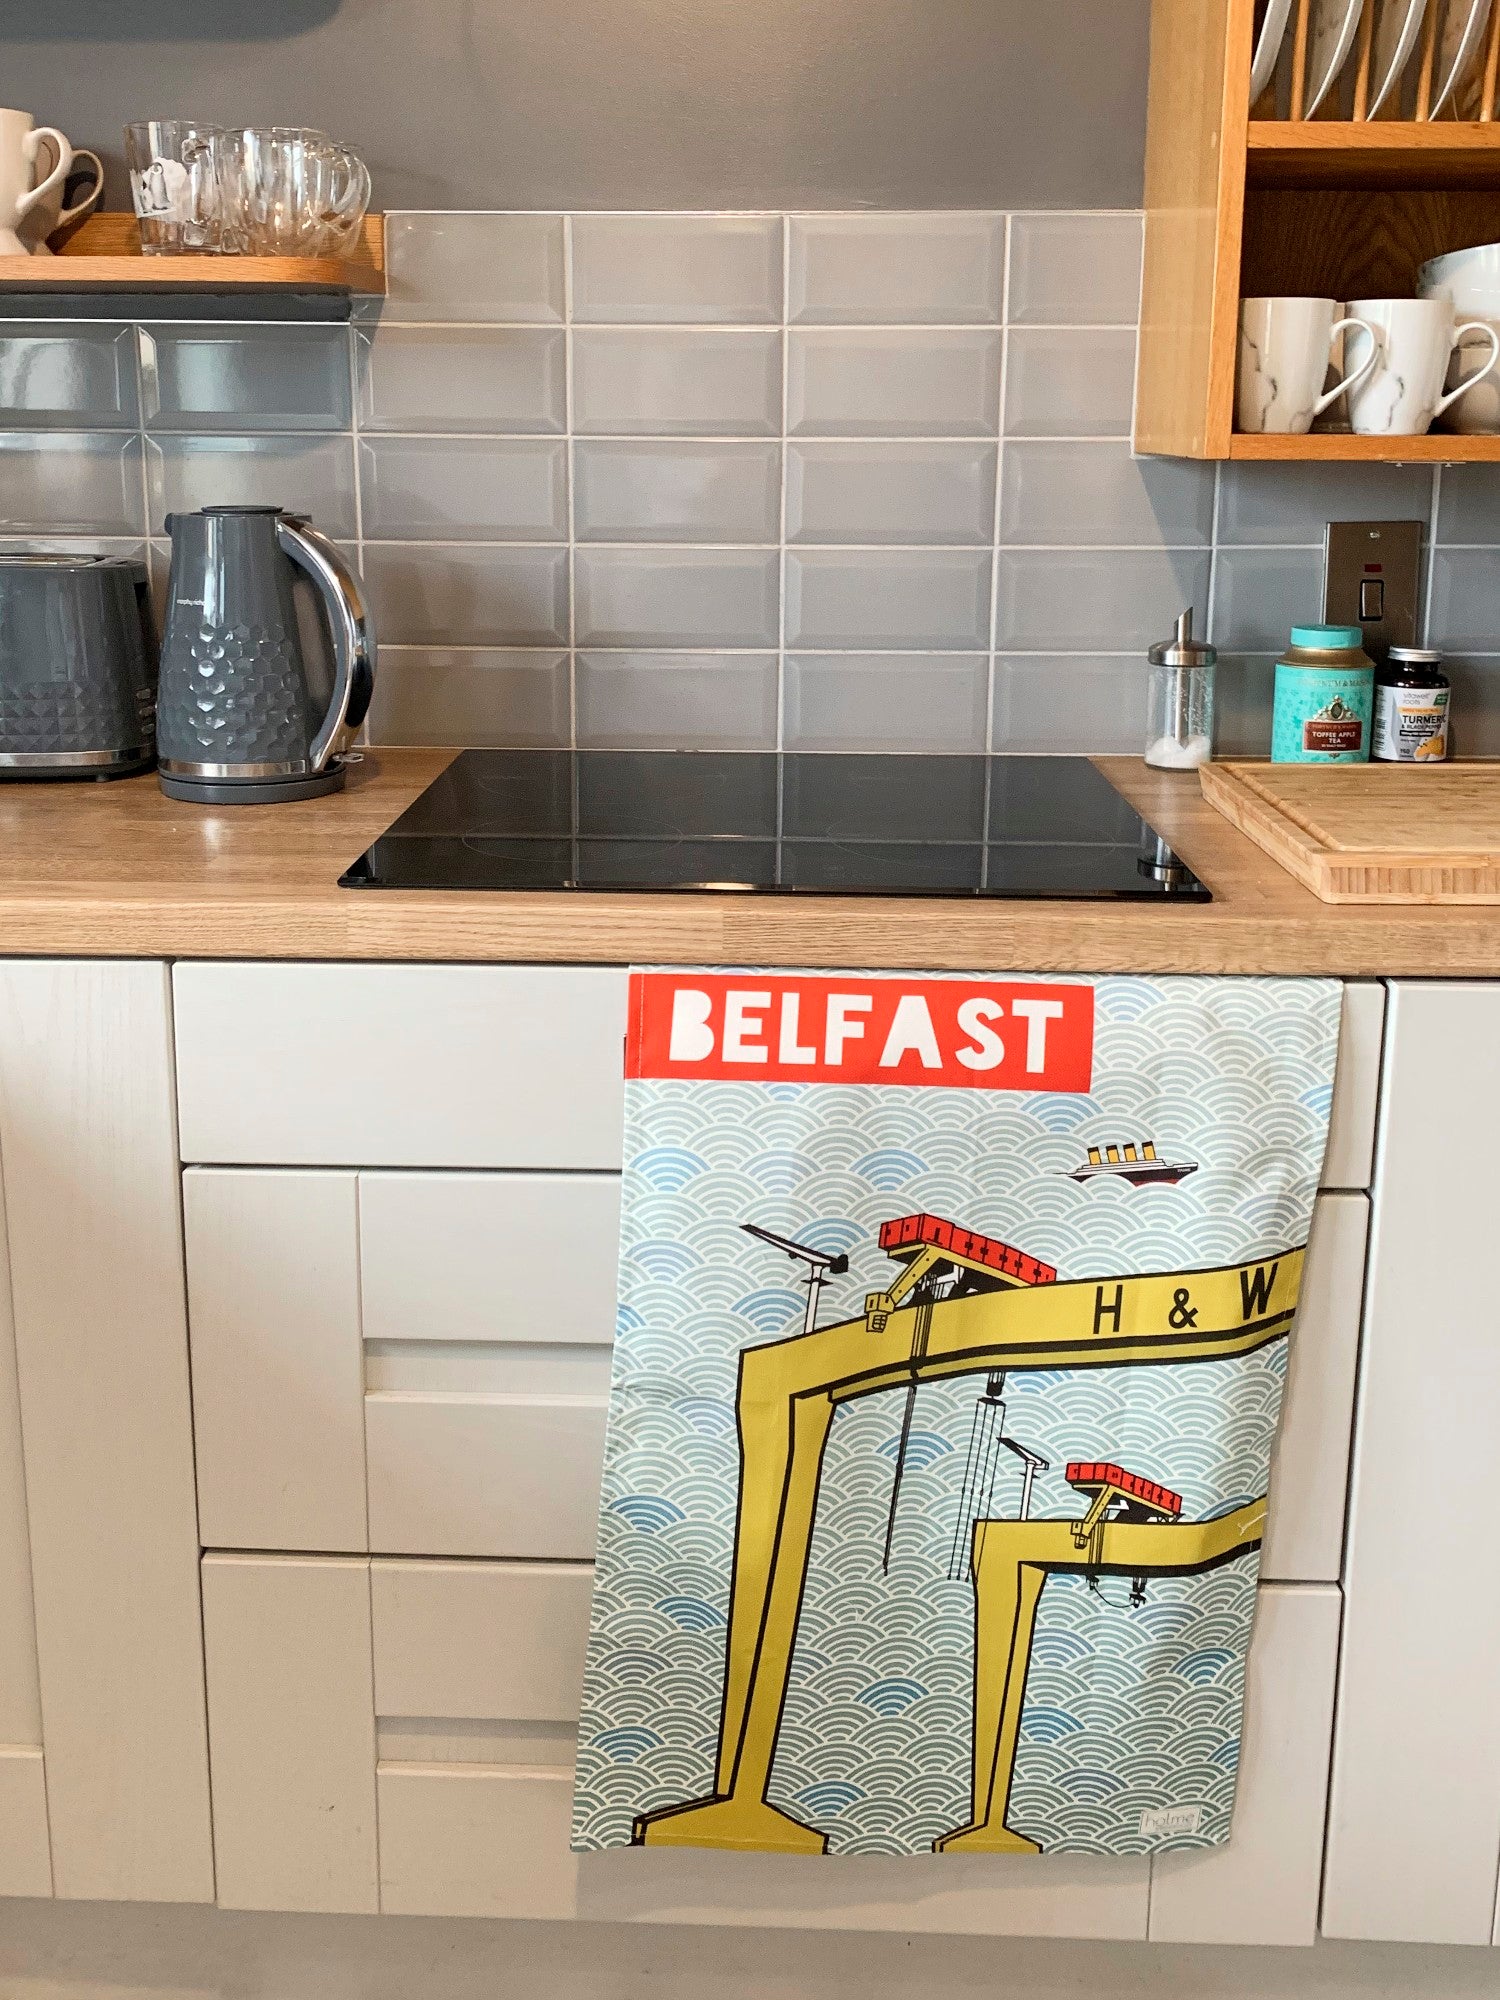 Belfast Tea Towel featuring the Harland and Wolff Cranes showing full opened product hanging from a kitchen cabinet door.